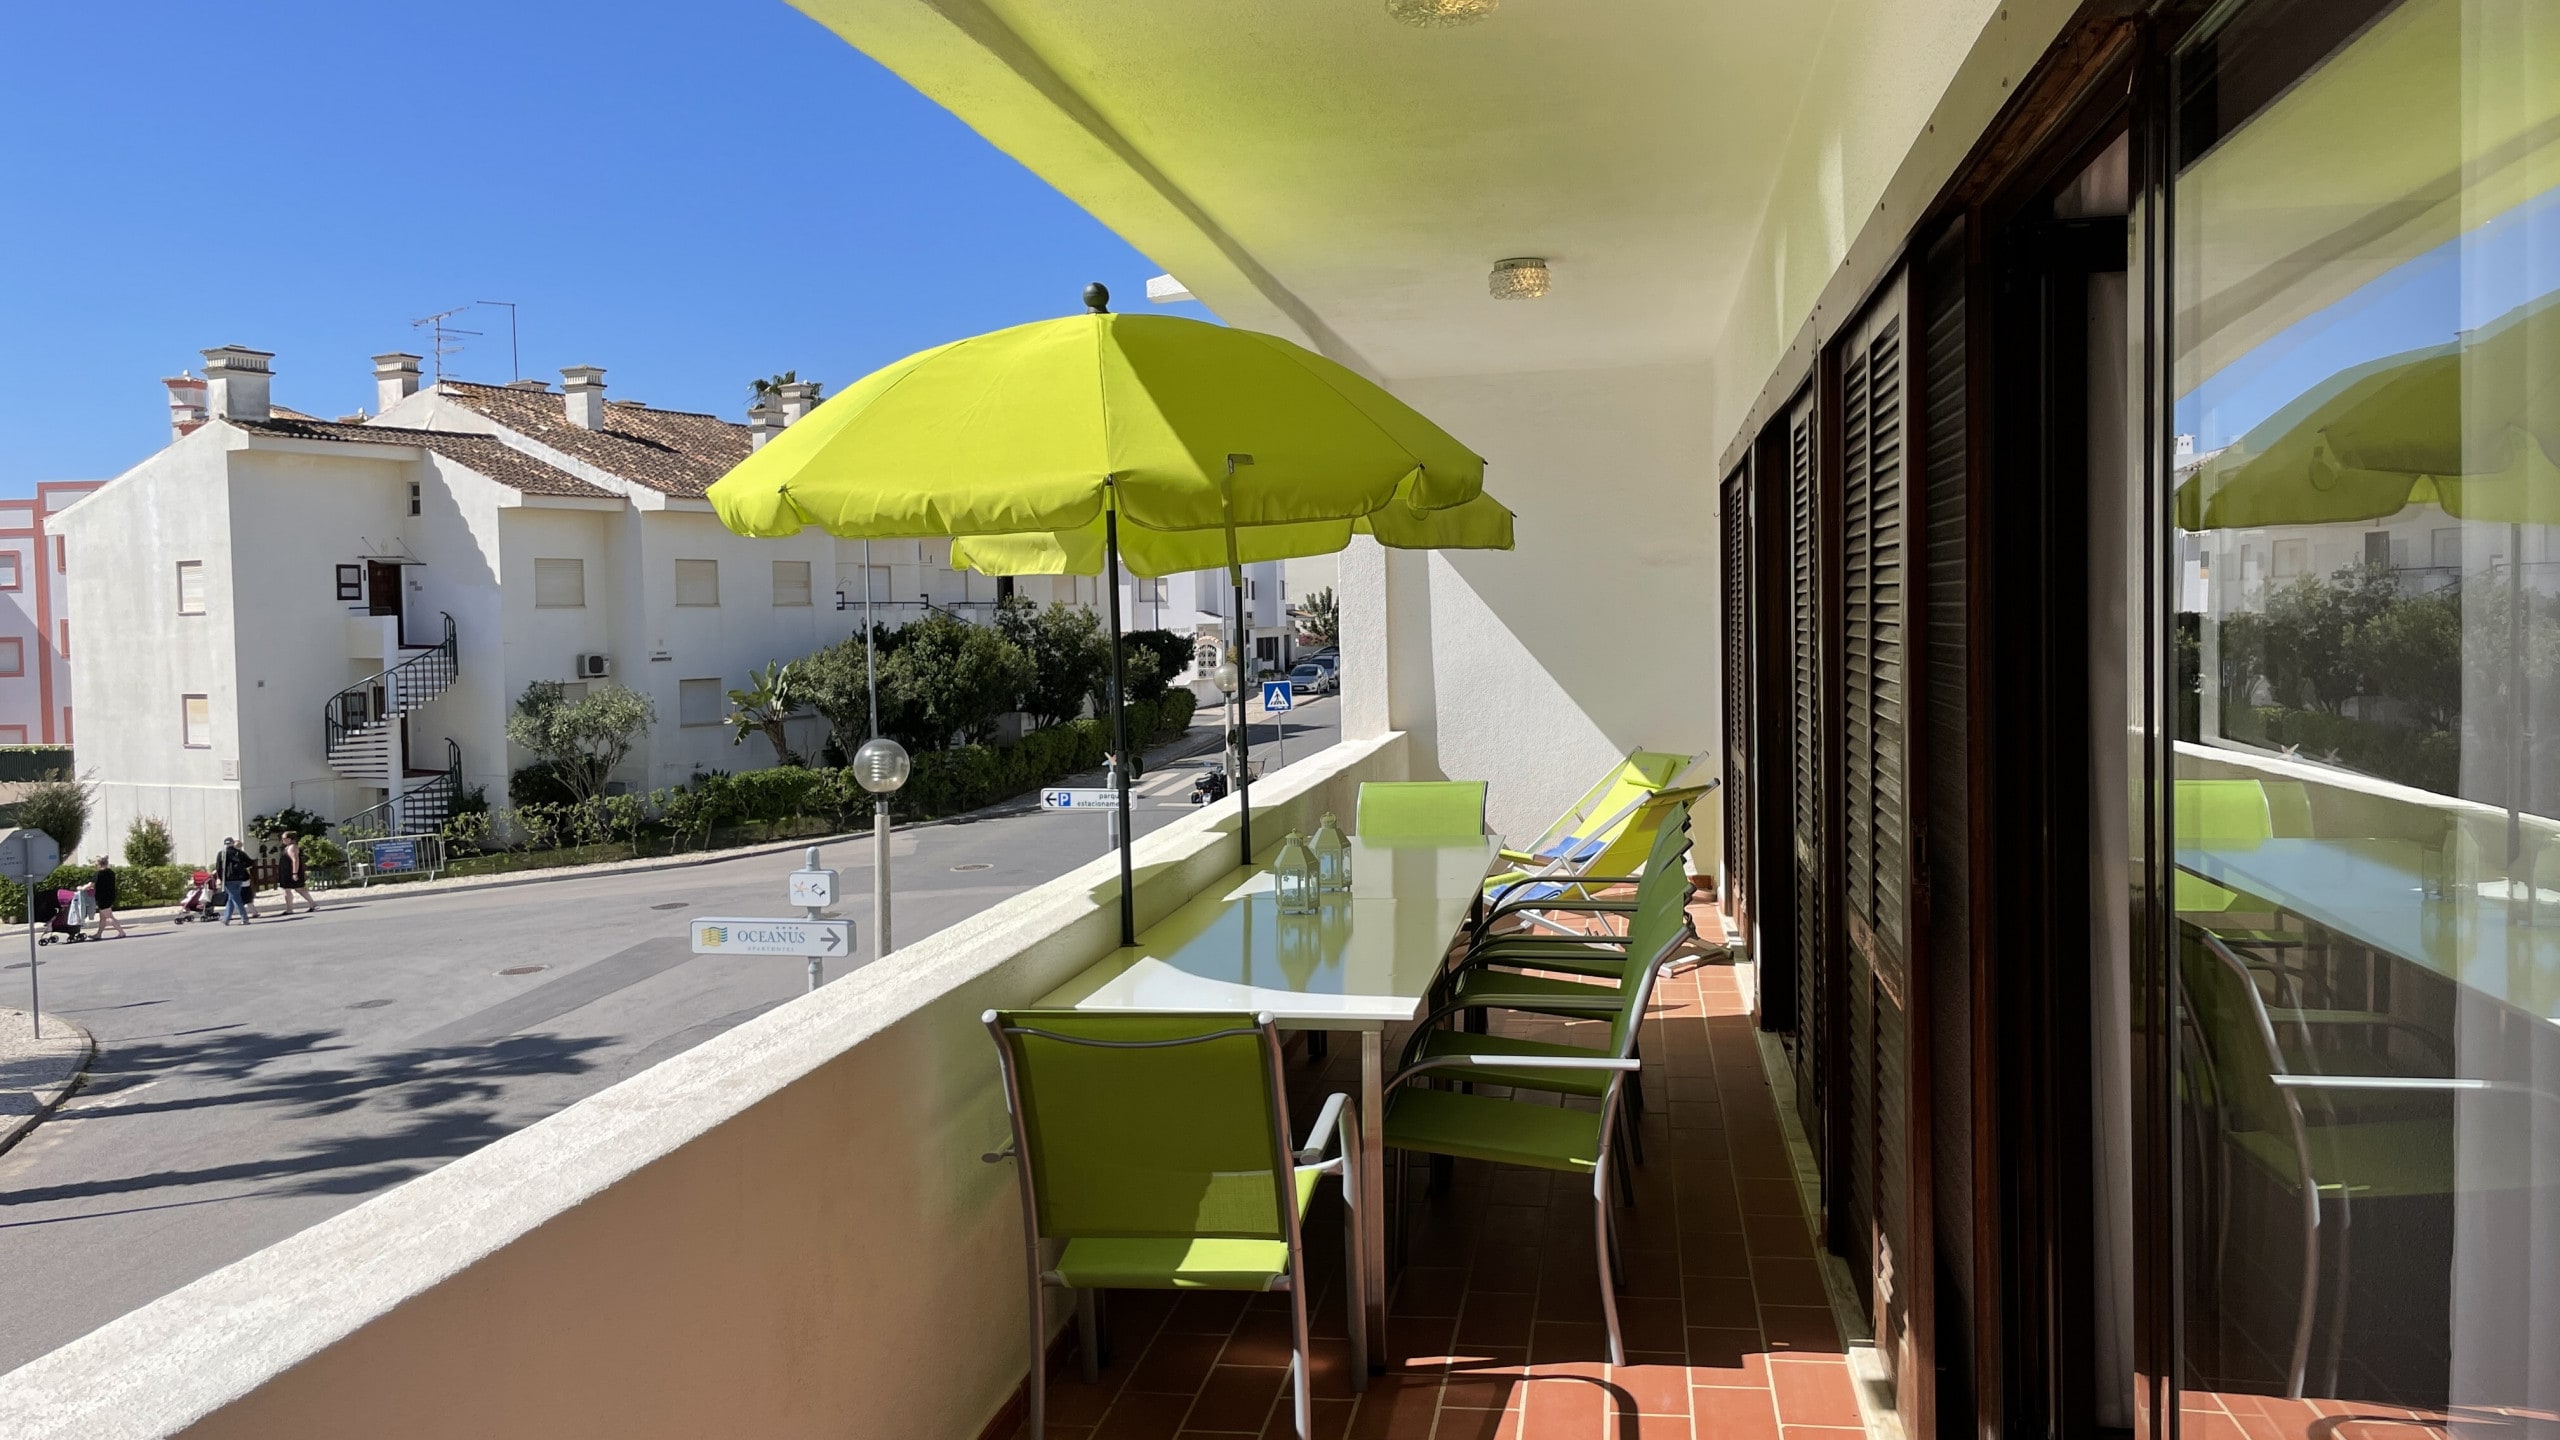 Apartment with 2 bedrooms and two bathrooms, with a fully equipped kitchen; 300 meters from Olhos d'Água beach